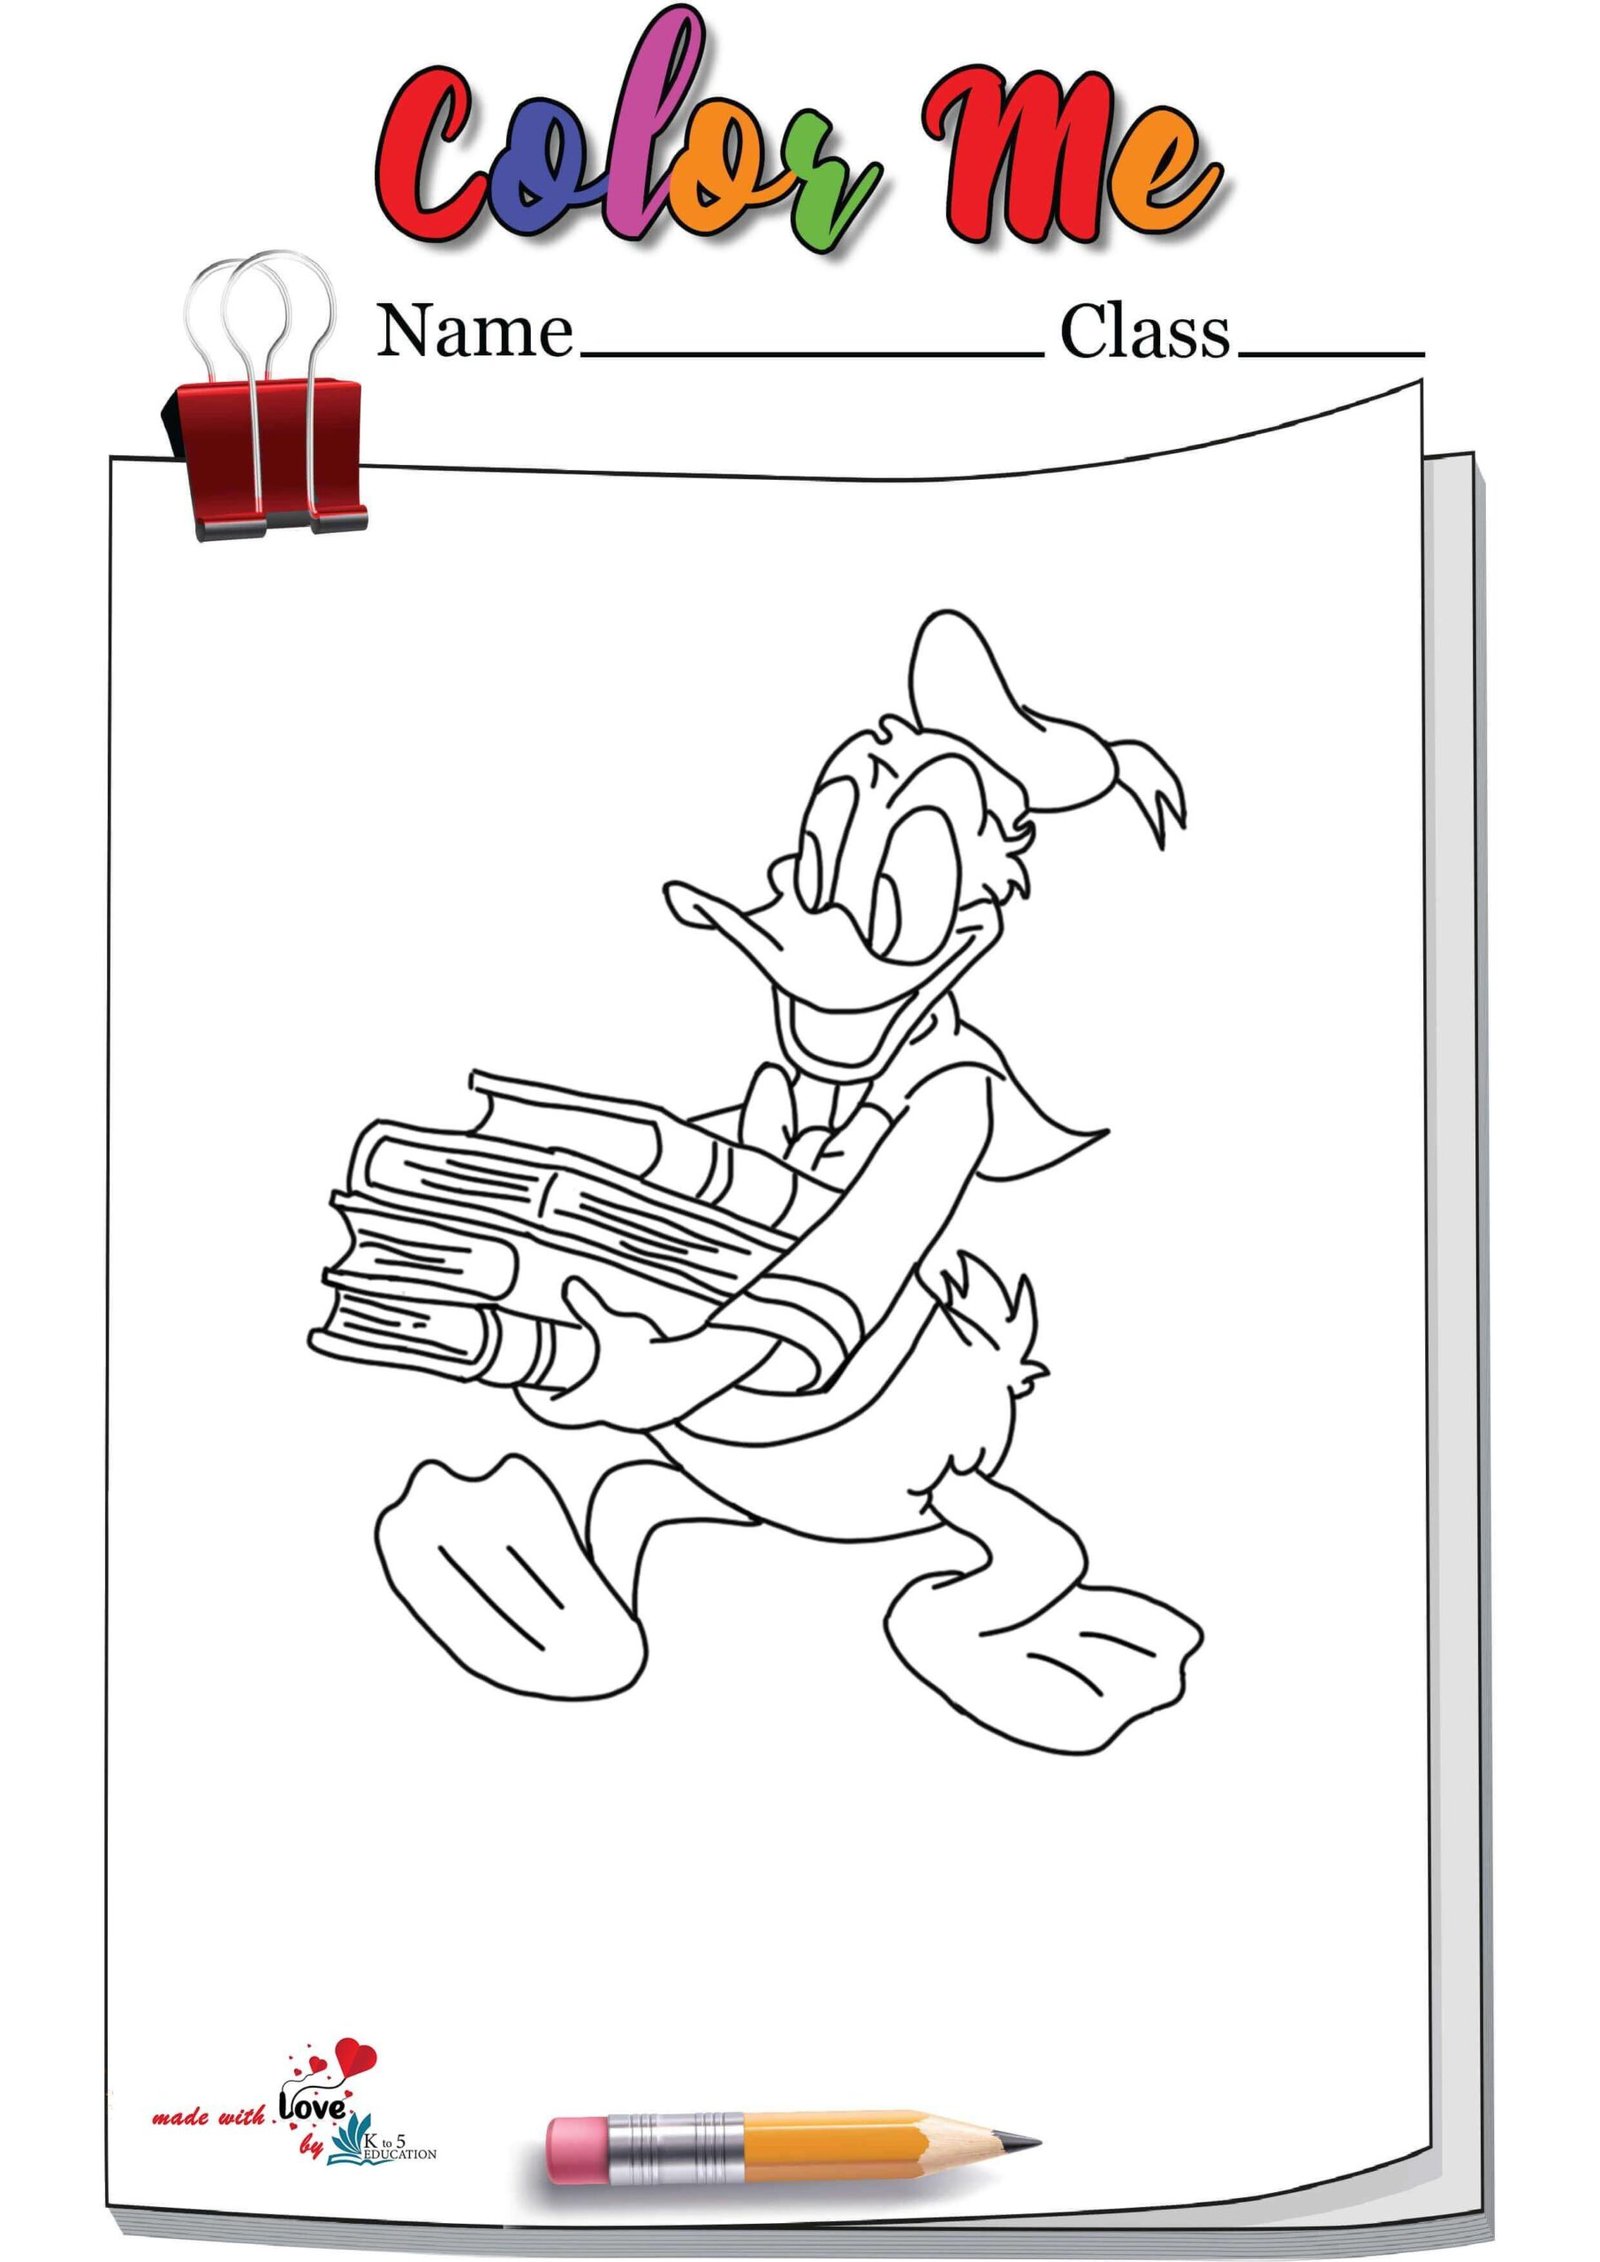 Coloring Pages Donald Duck